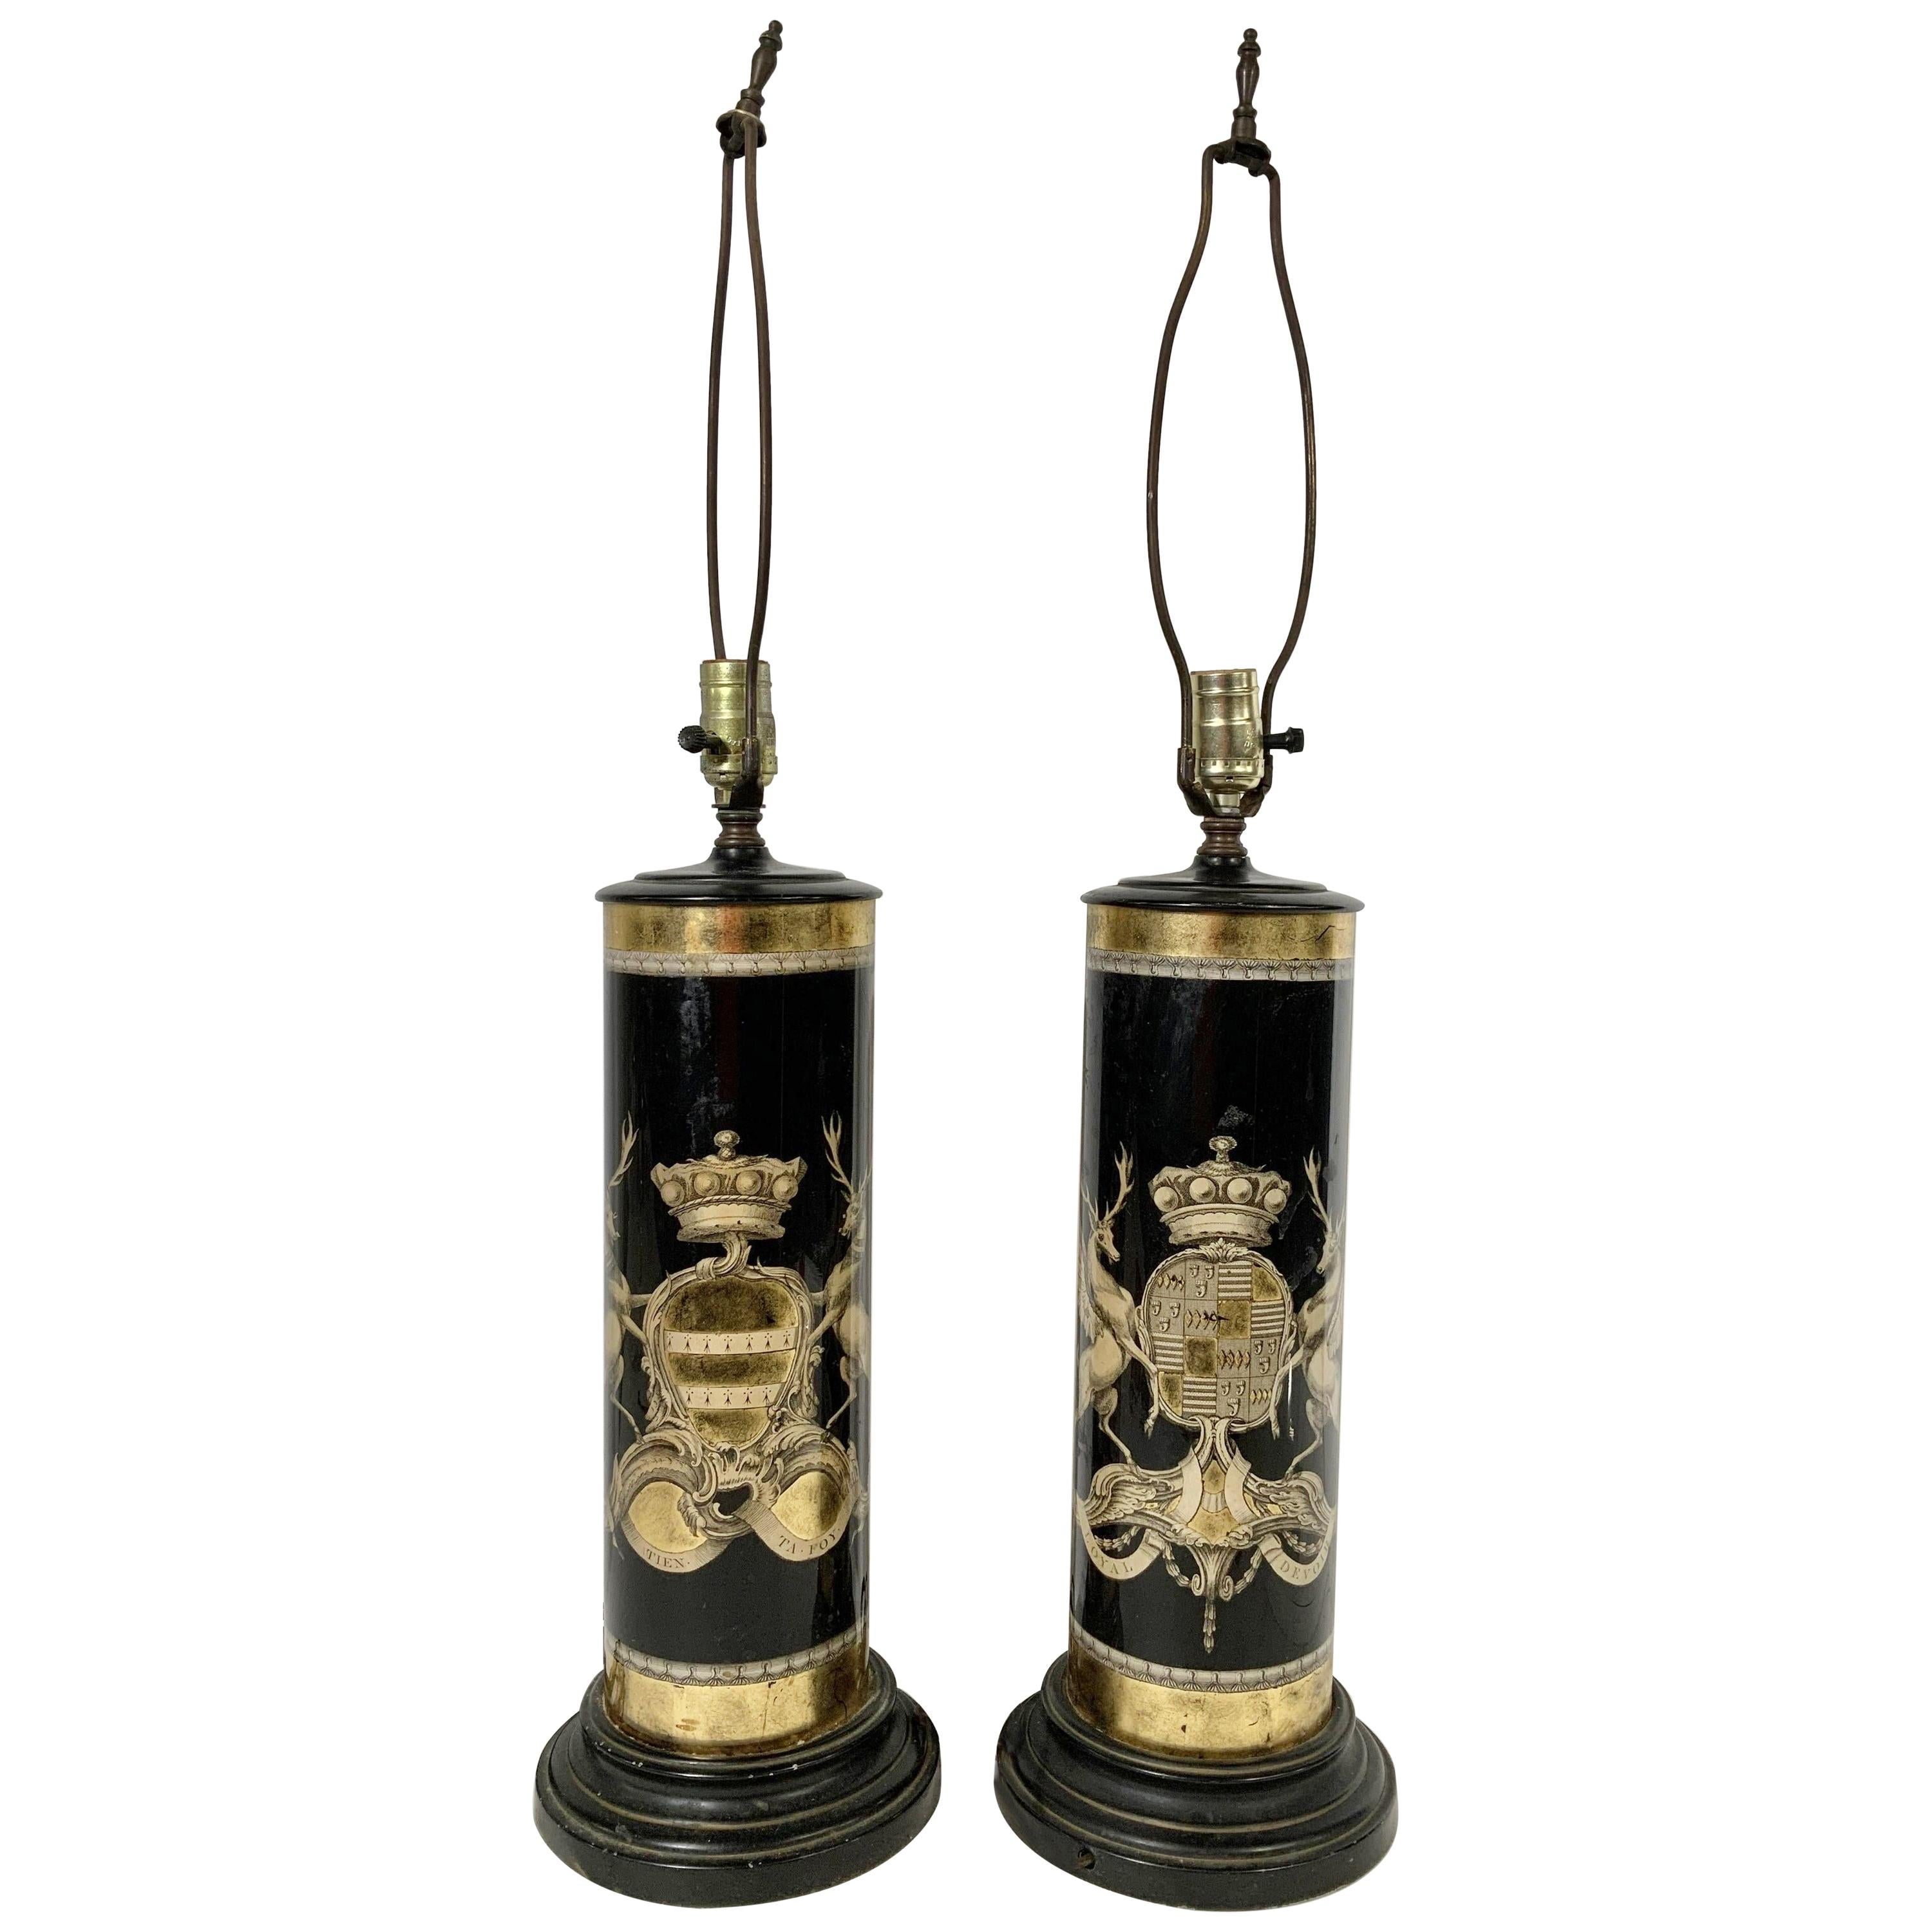 Pair of Verre Églomisé Lamps Coats of Arms for the Earls Bathurst and Granville